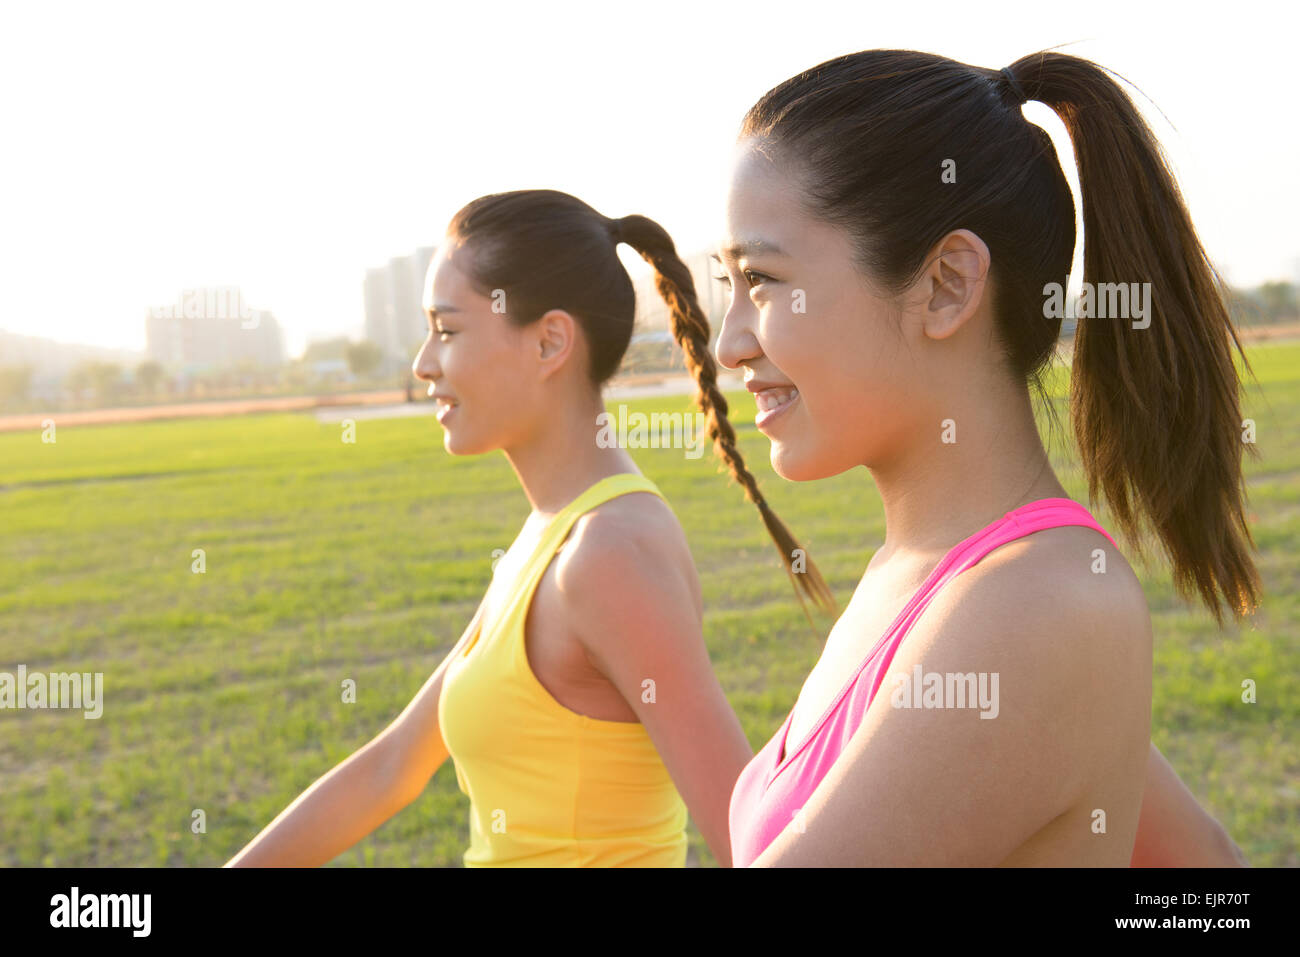 Girlfriends exercising together Stock Photo